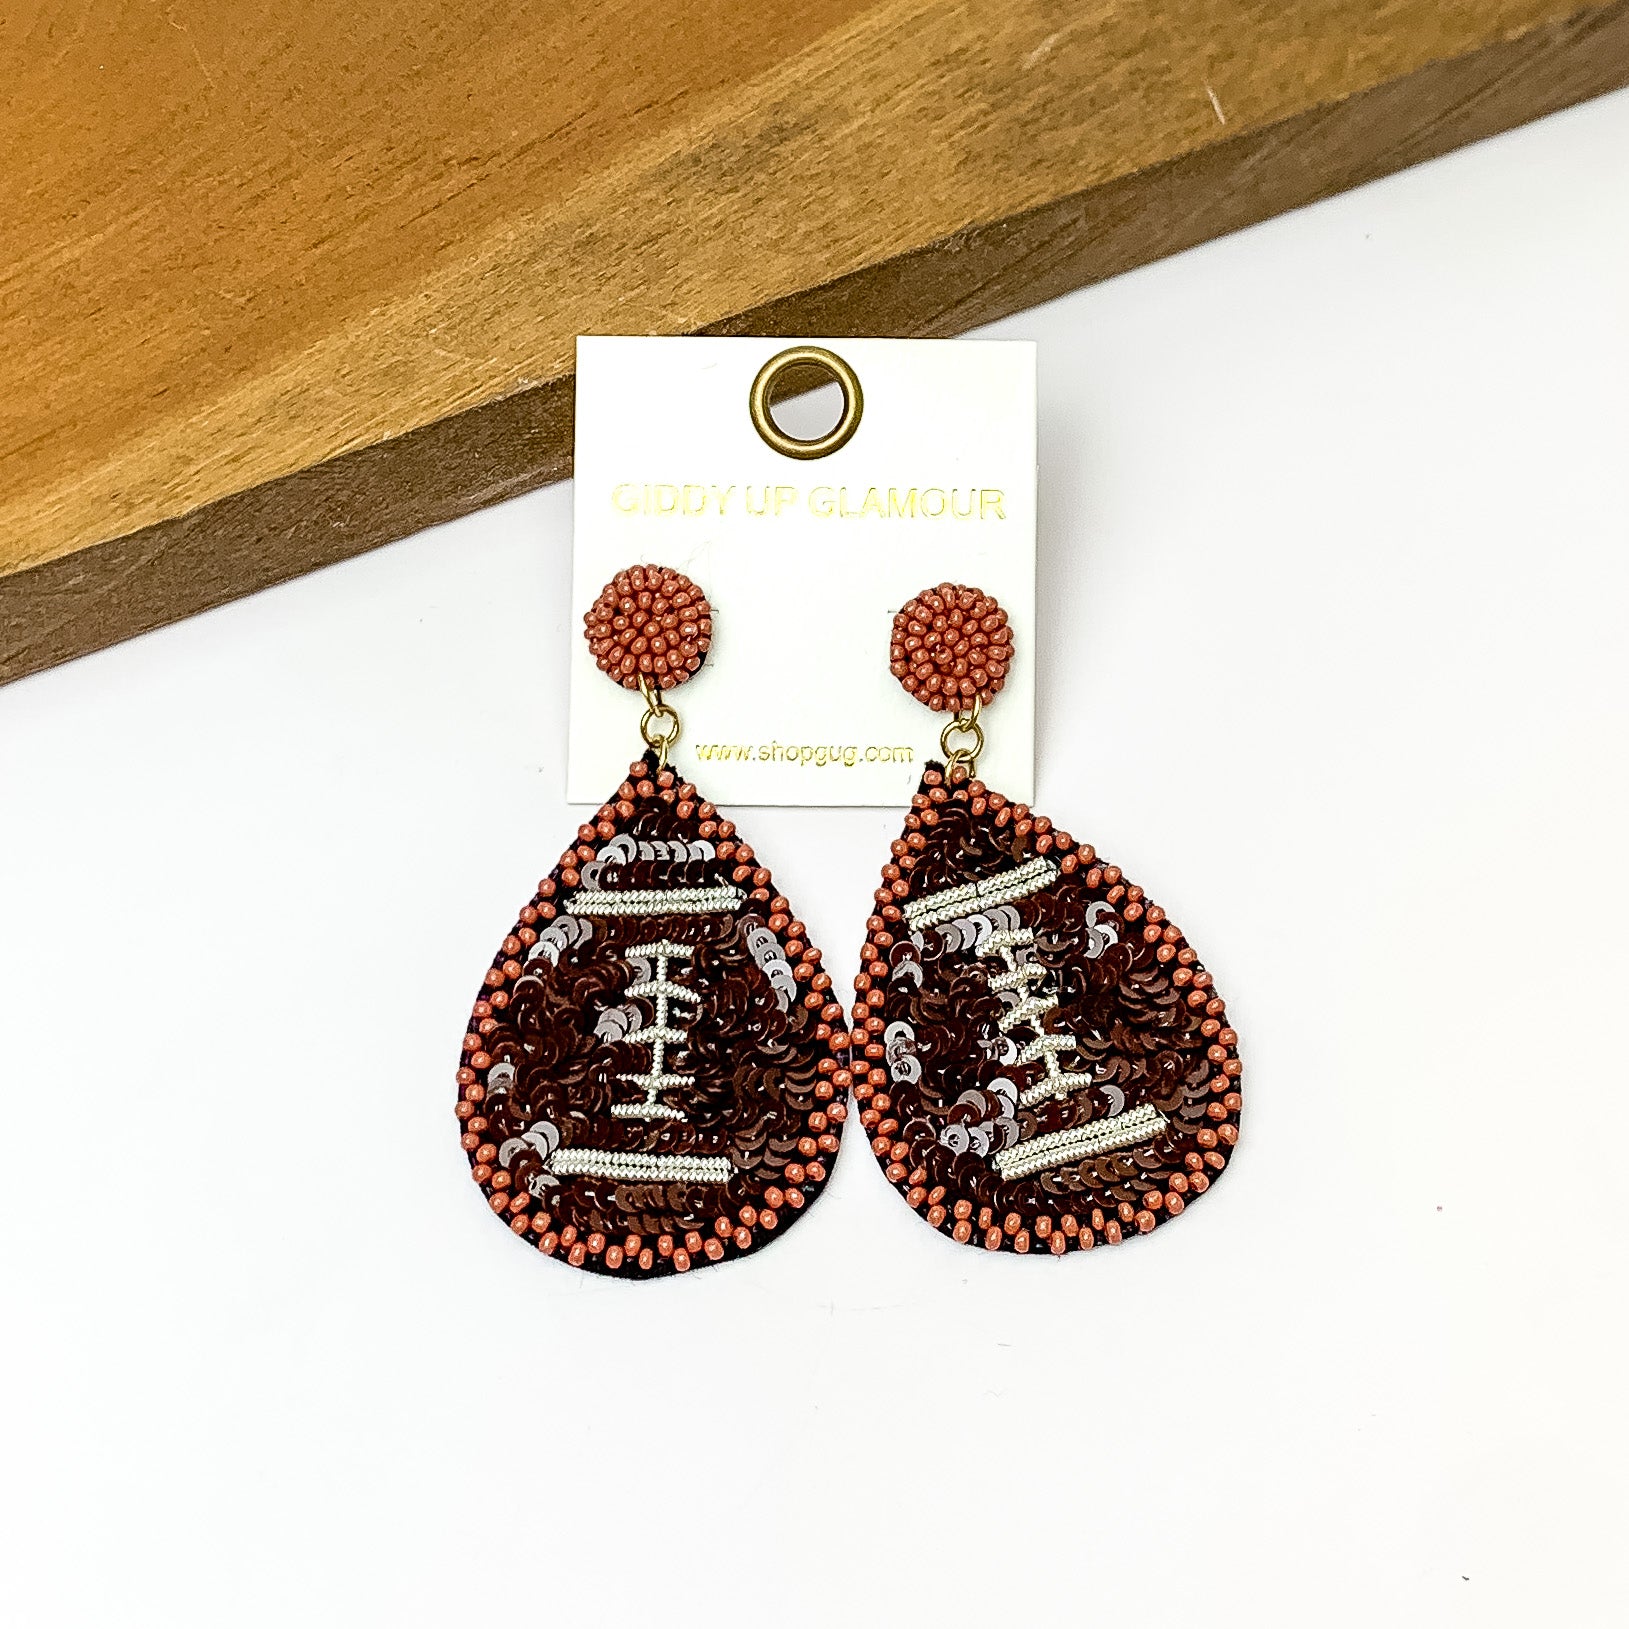 Football Teardrop Earrings With Sequins in Brown. Pictured on a white background with the earrings against a wood piece.